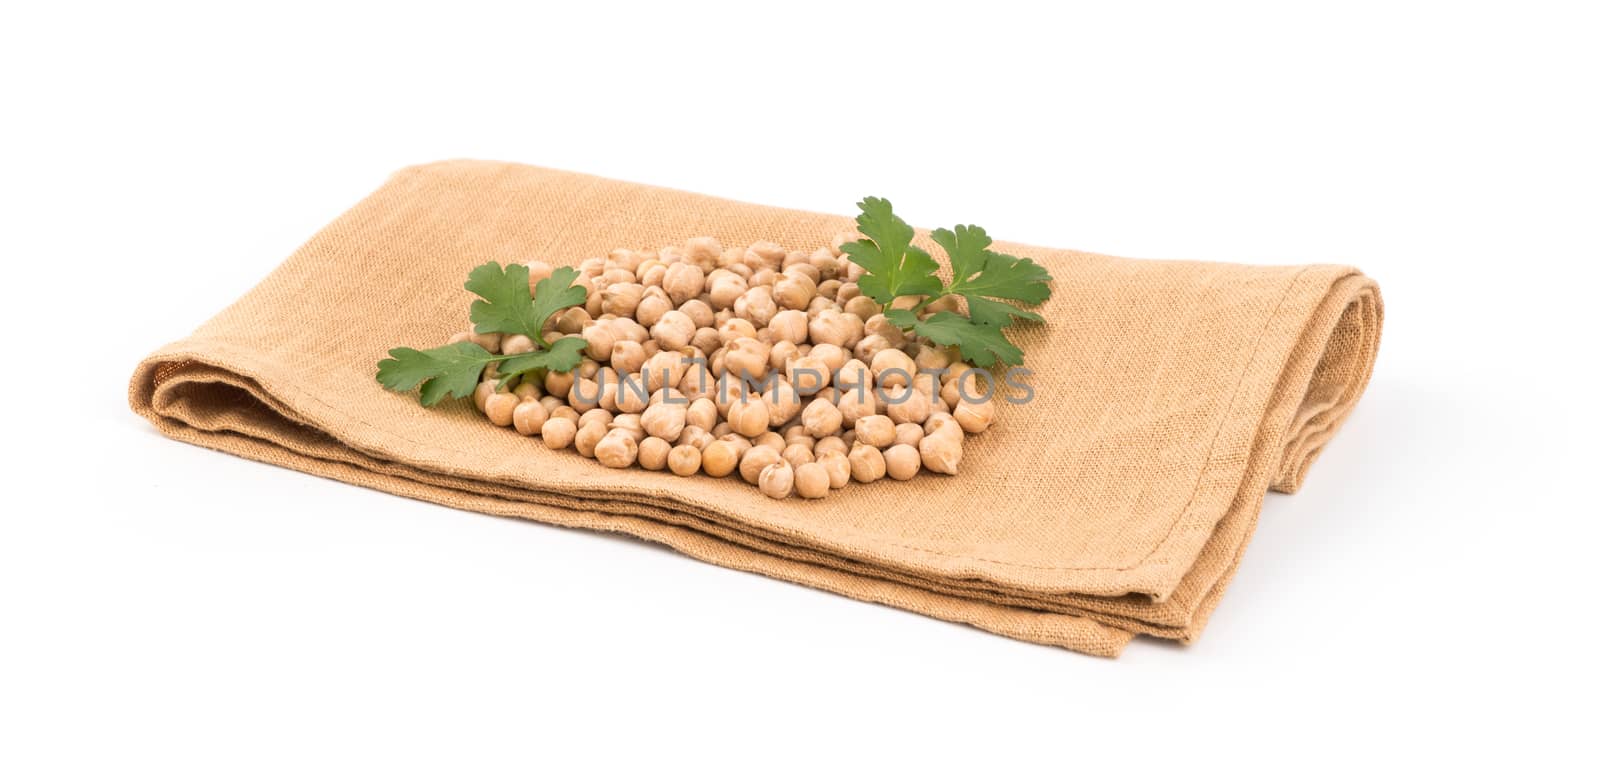 Chickpeas in a pile on a white background